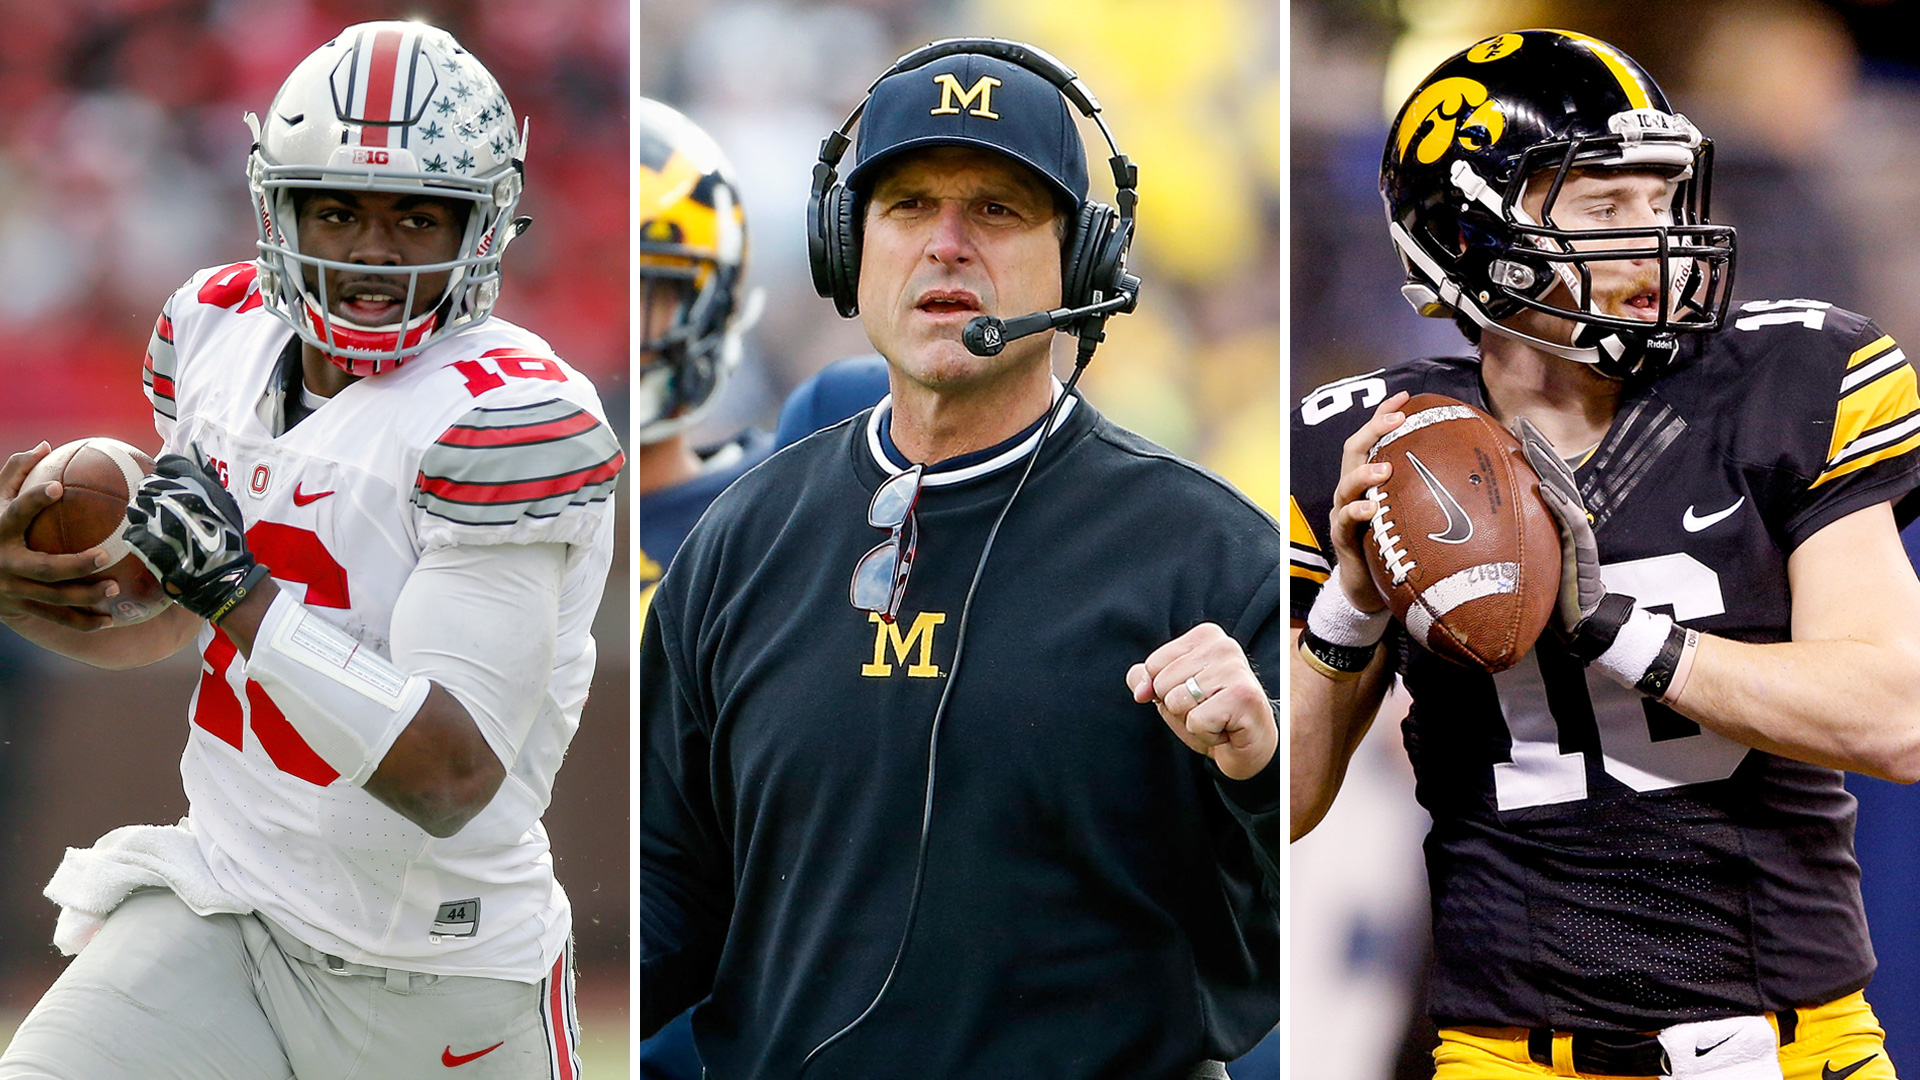 Big Ten Predictions: Breakouts, upsets and a battle for survival | Sporting News1920 x 1080